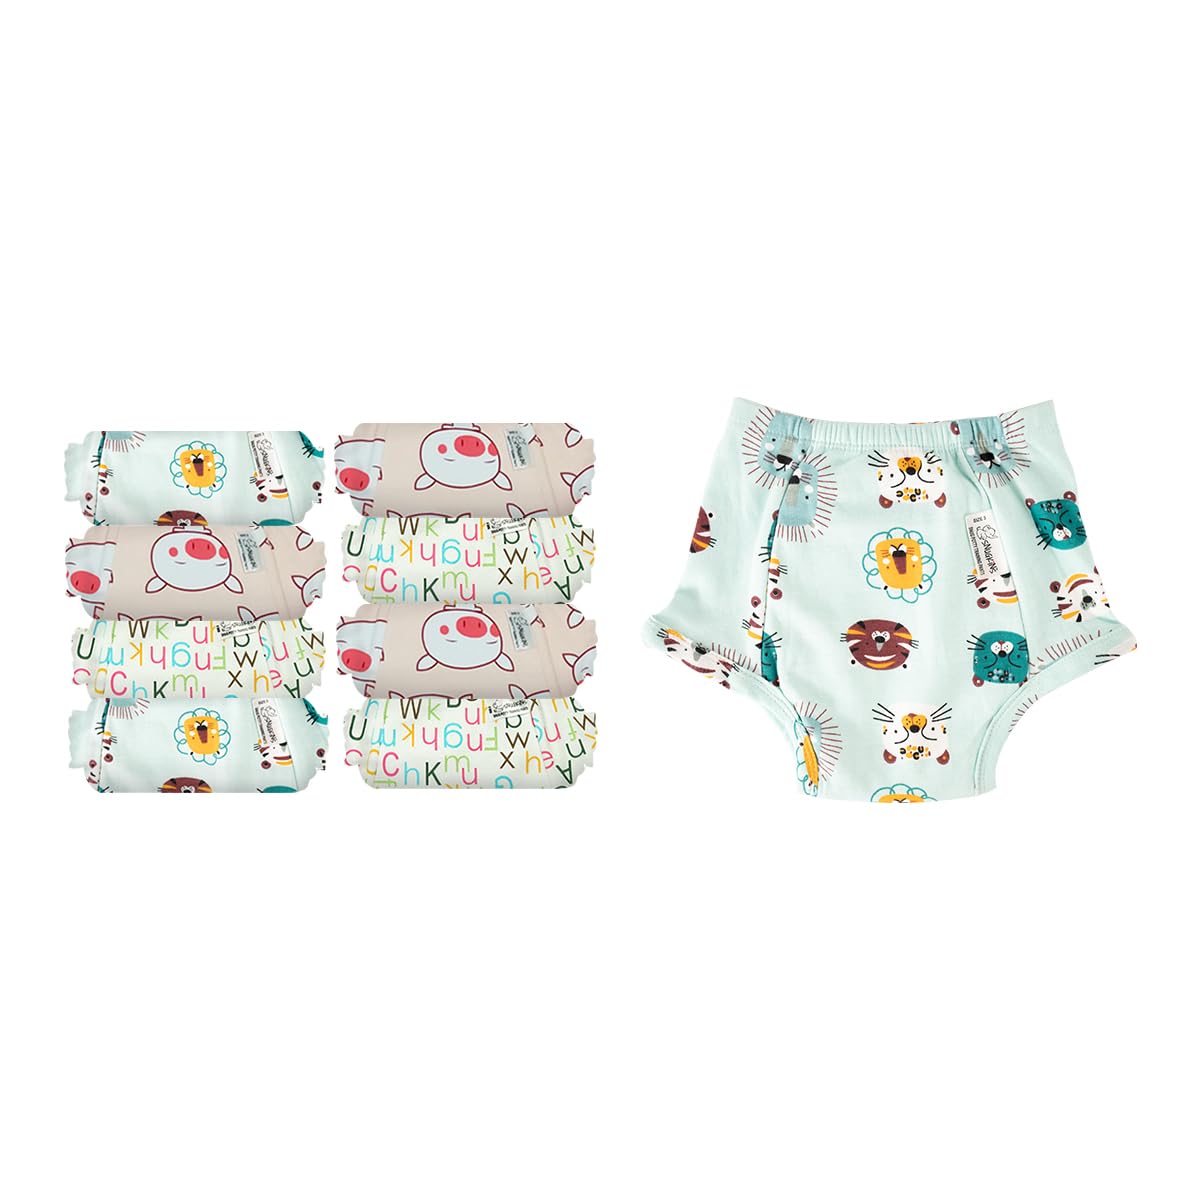 Snugkins - Snug Potty Training Pull-up Pants for Babies/ Toddlers/Kids.  Reusable Potty Training Underwear for Girls and Boys. 100% Cotton. (Size 2